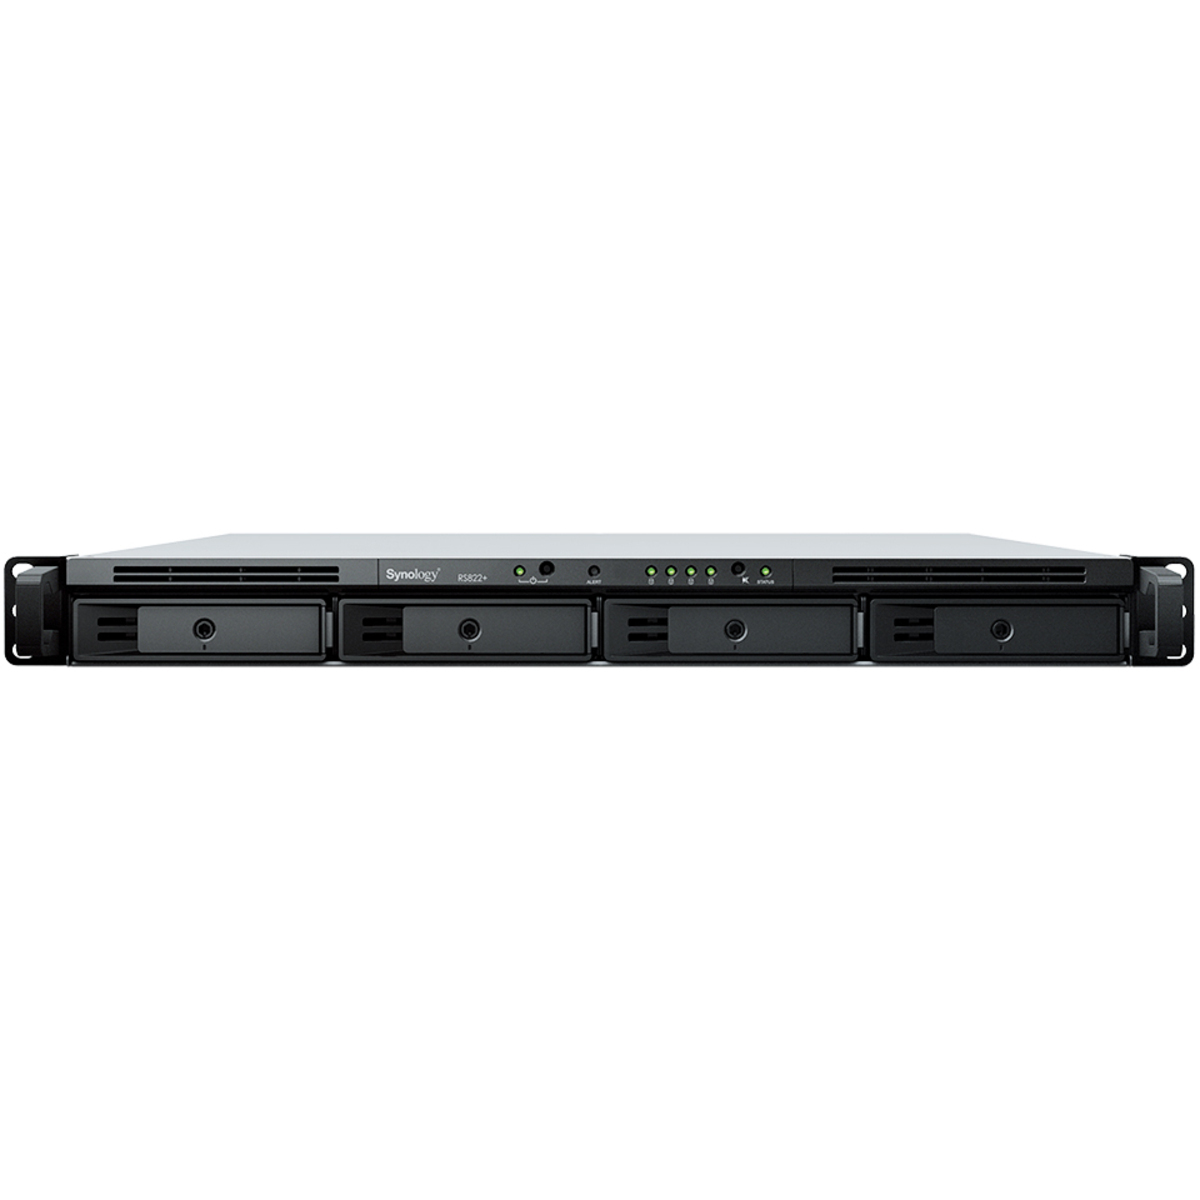 Synology RackStation RS822RP+ RackMount 4-Bay Multimedia / Power User / Business NAS - Network Attached Storage Device Burn-In Tested Configurations - FREE RAM UPGRADE RackStation RS822RP+